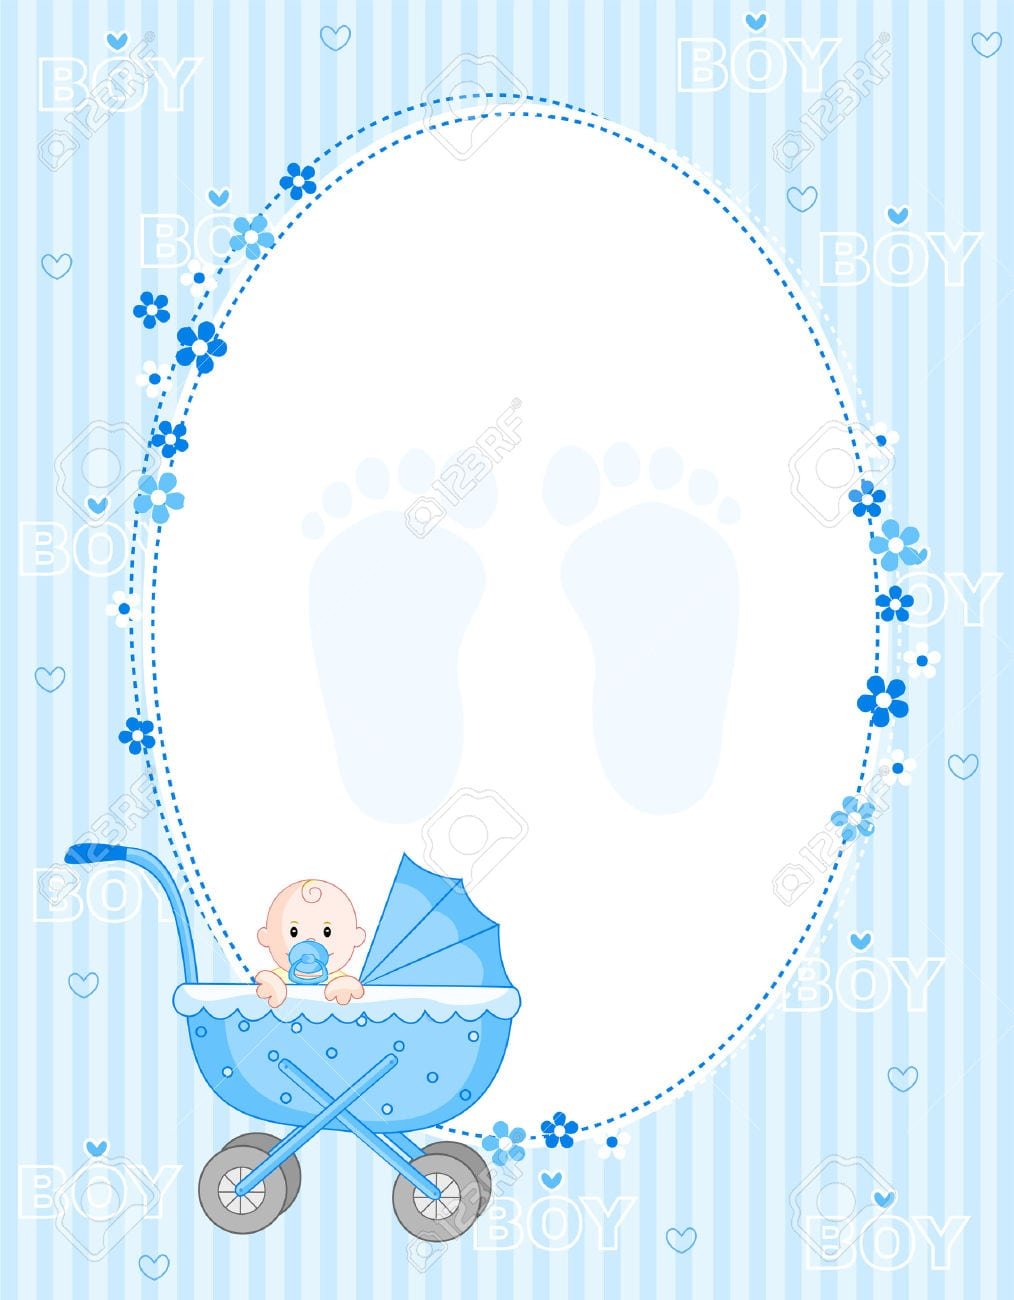 Baby Boy Arrival Card  Party Invitation Royalty Free Cliparts